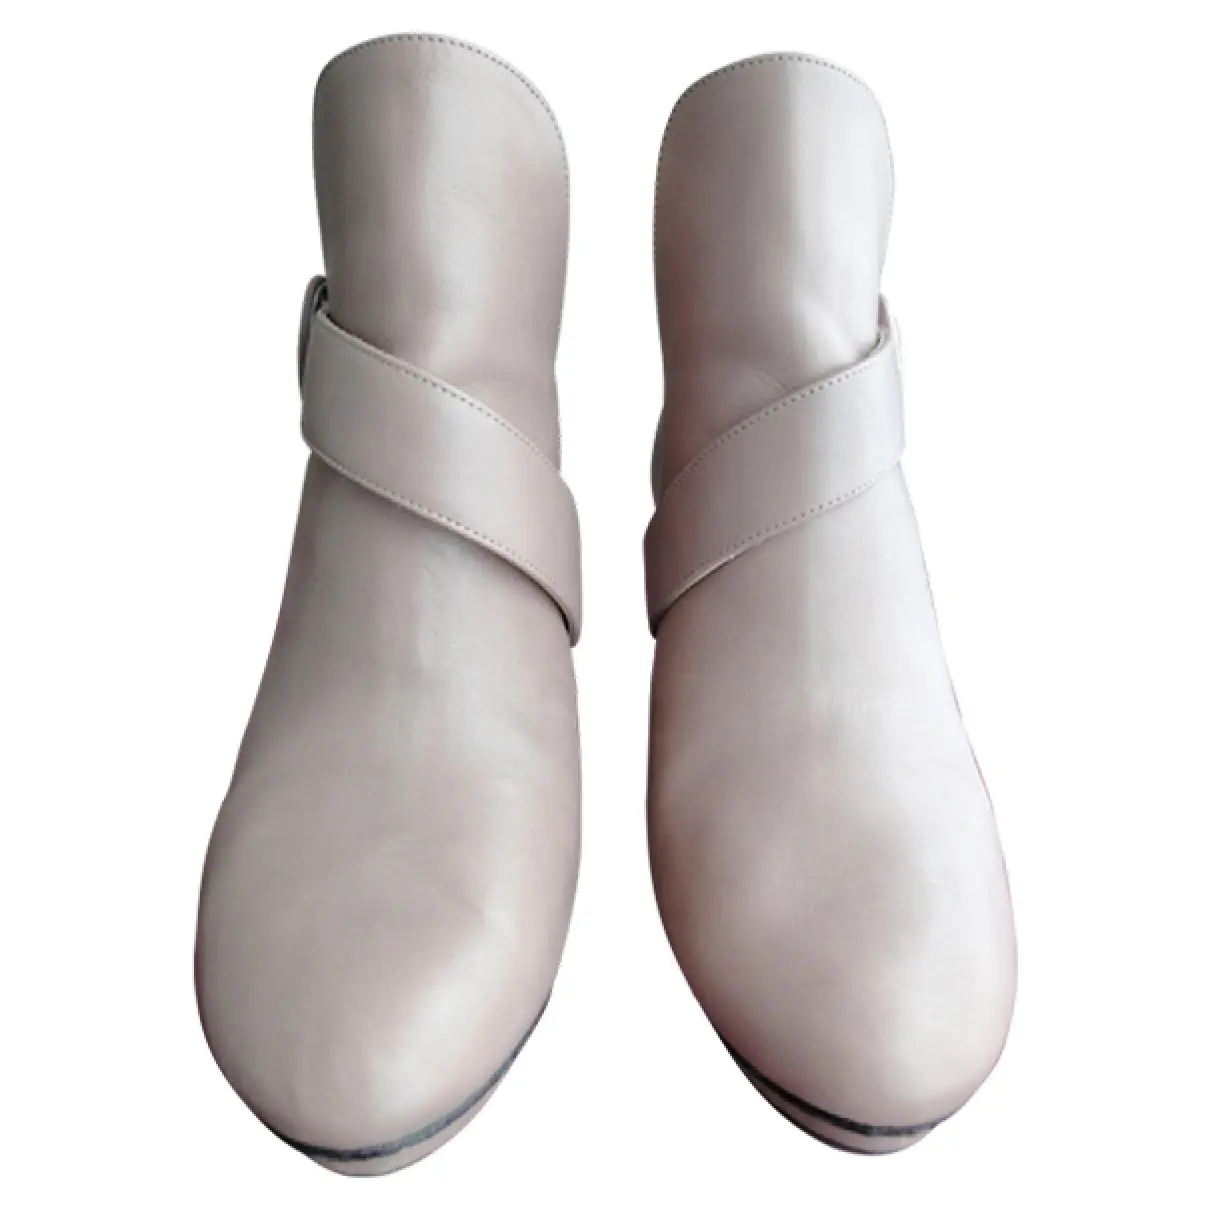 Buy Repetto RUDY BOOTS online